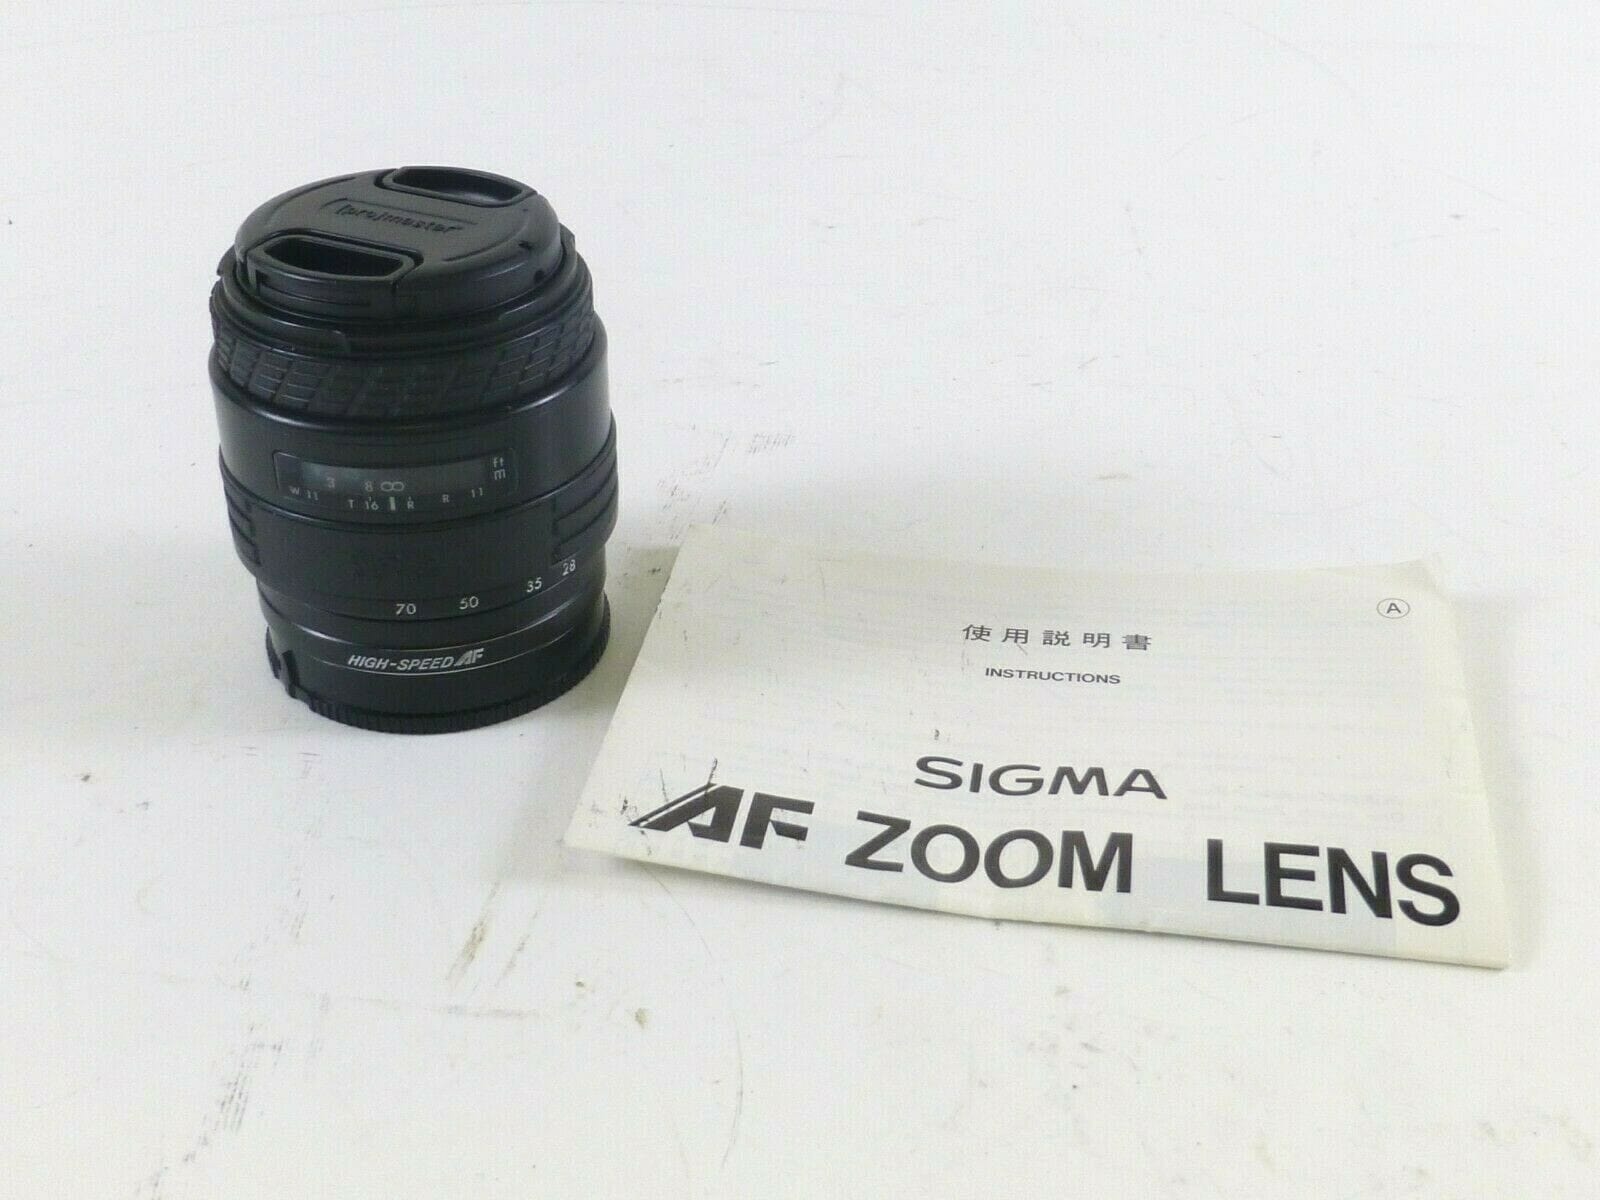 Sigma UC 28-70mm F/3.5-4.5 AF Lens with Manual for Sony/Minolta A